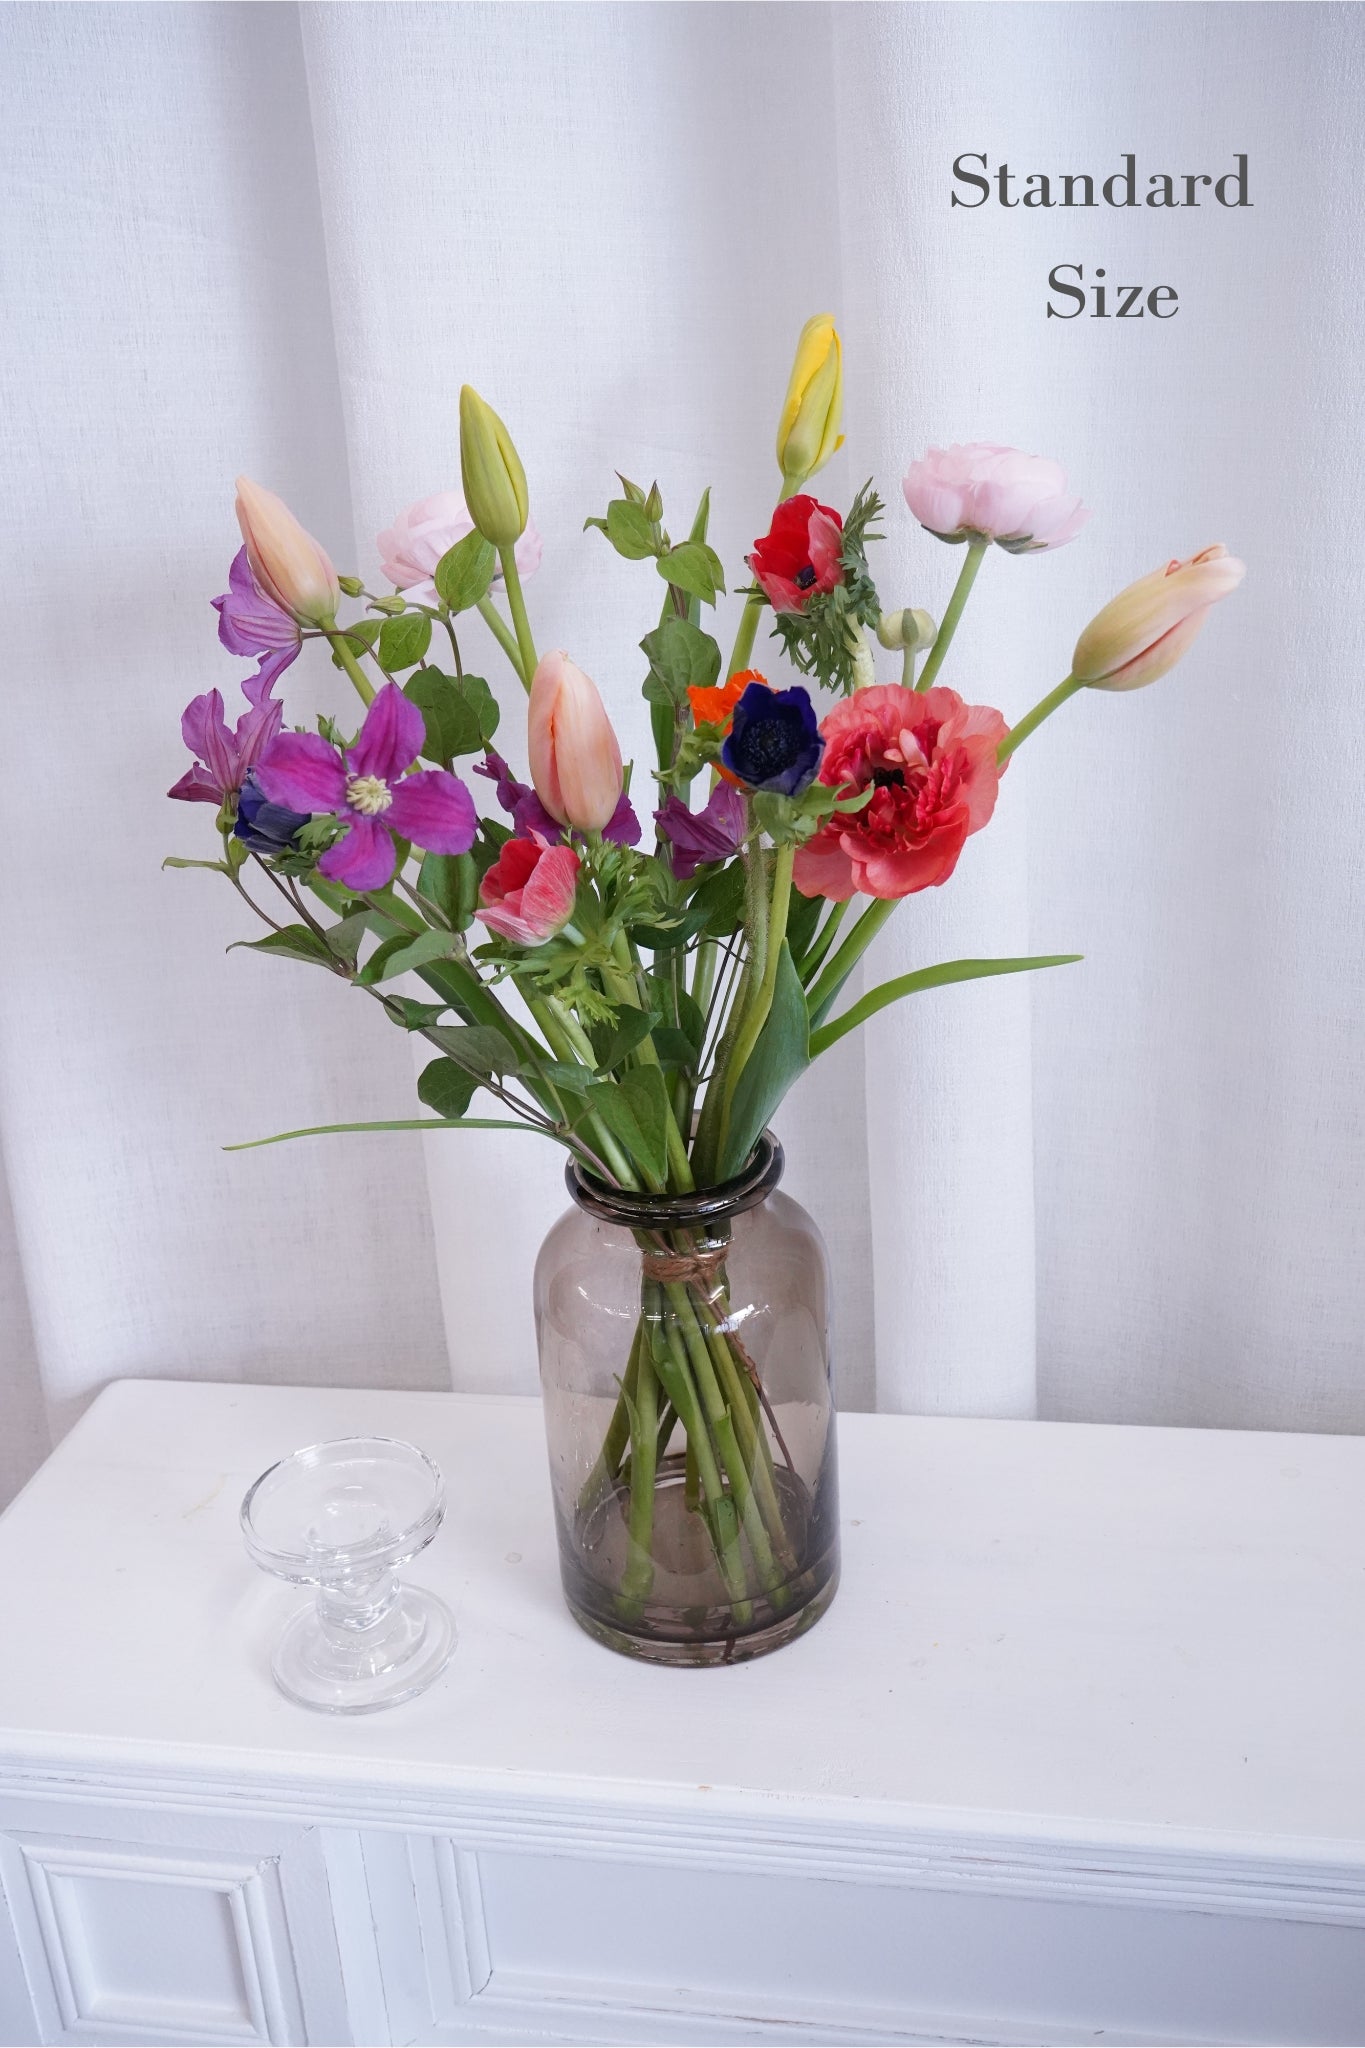 Weekly Flower Subscription - Standard - - Subscription - - 4